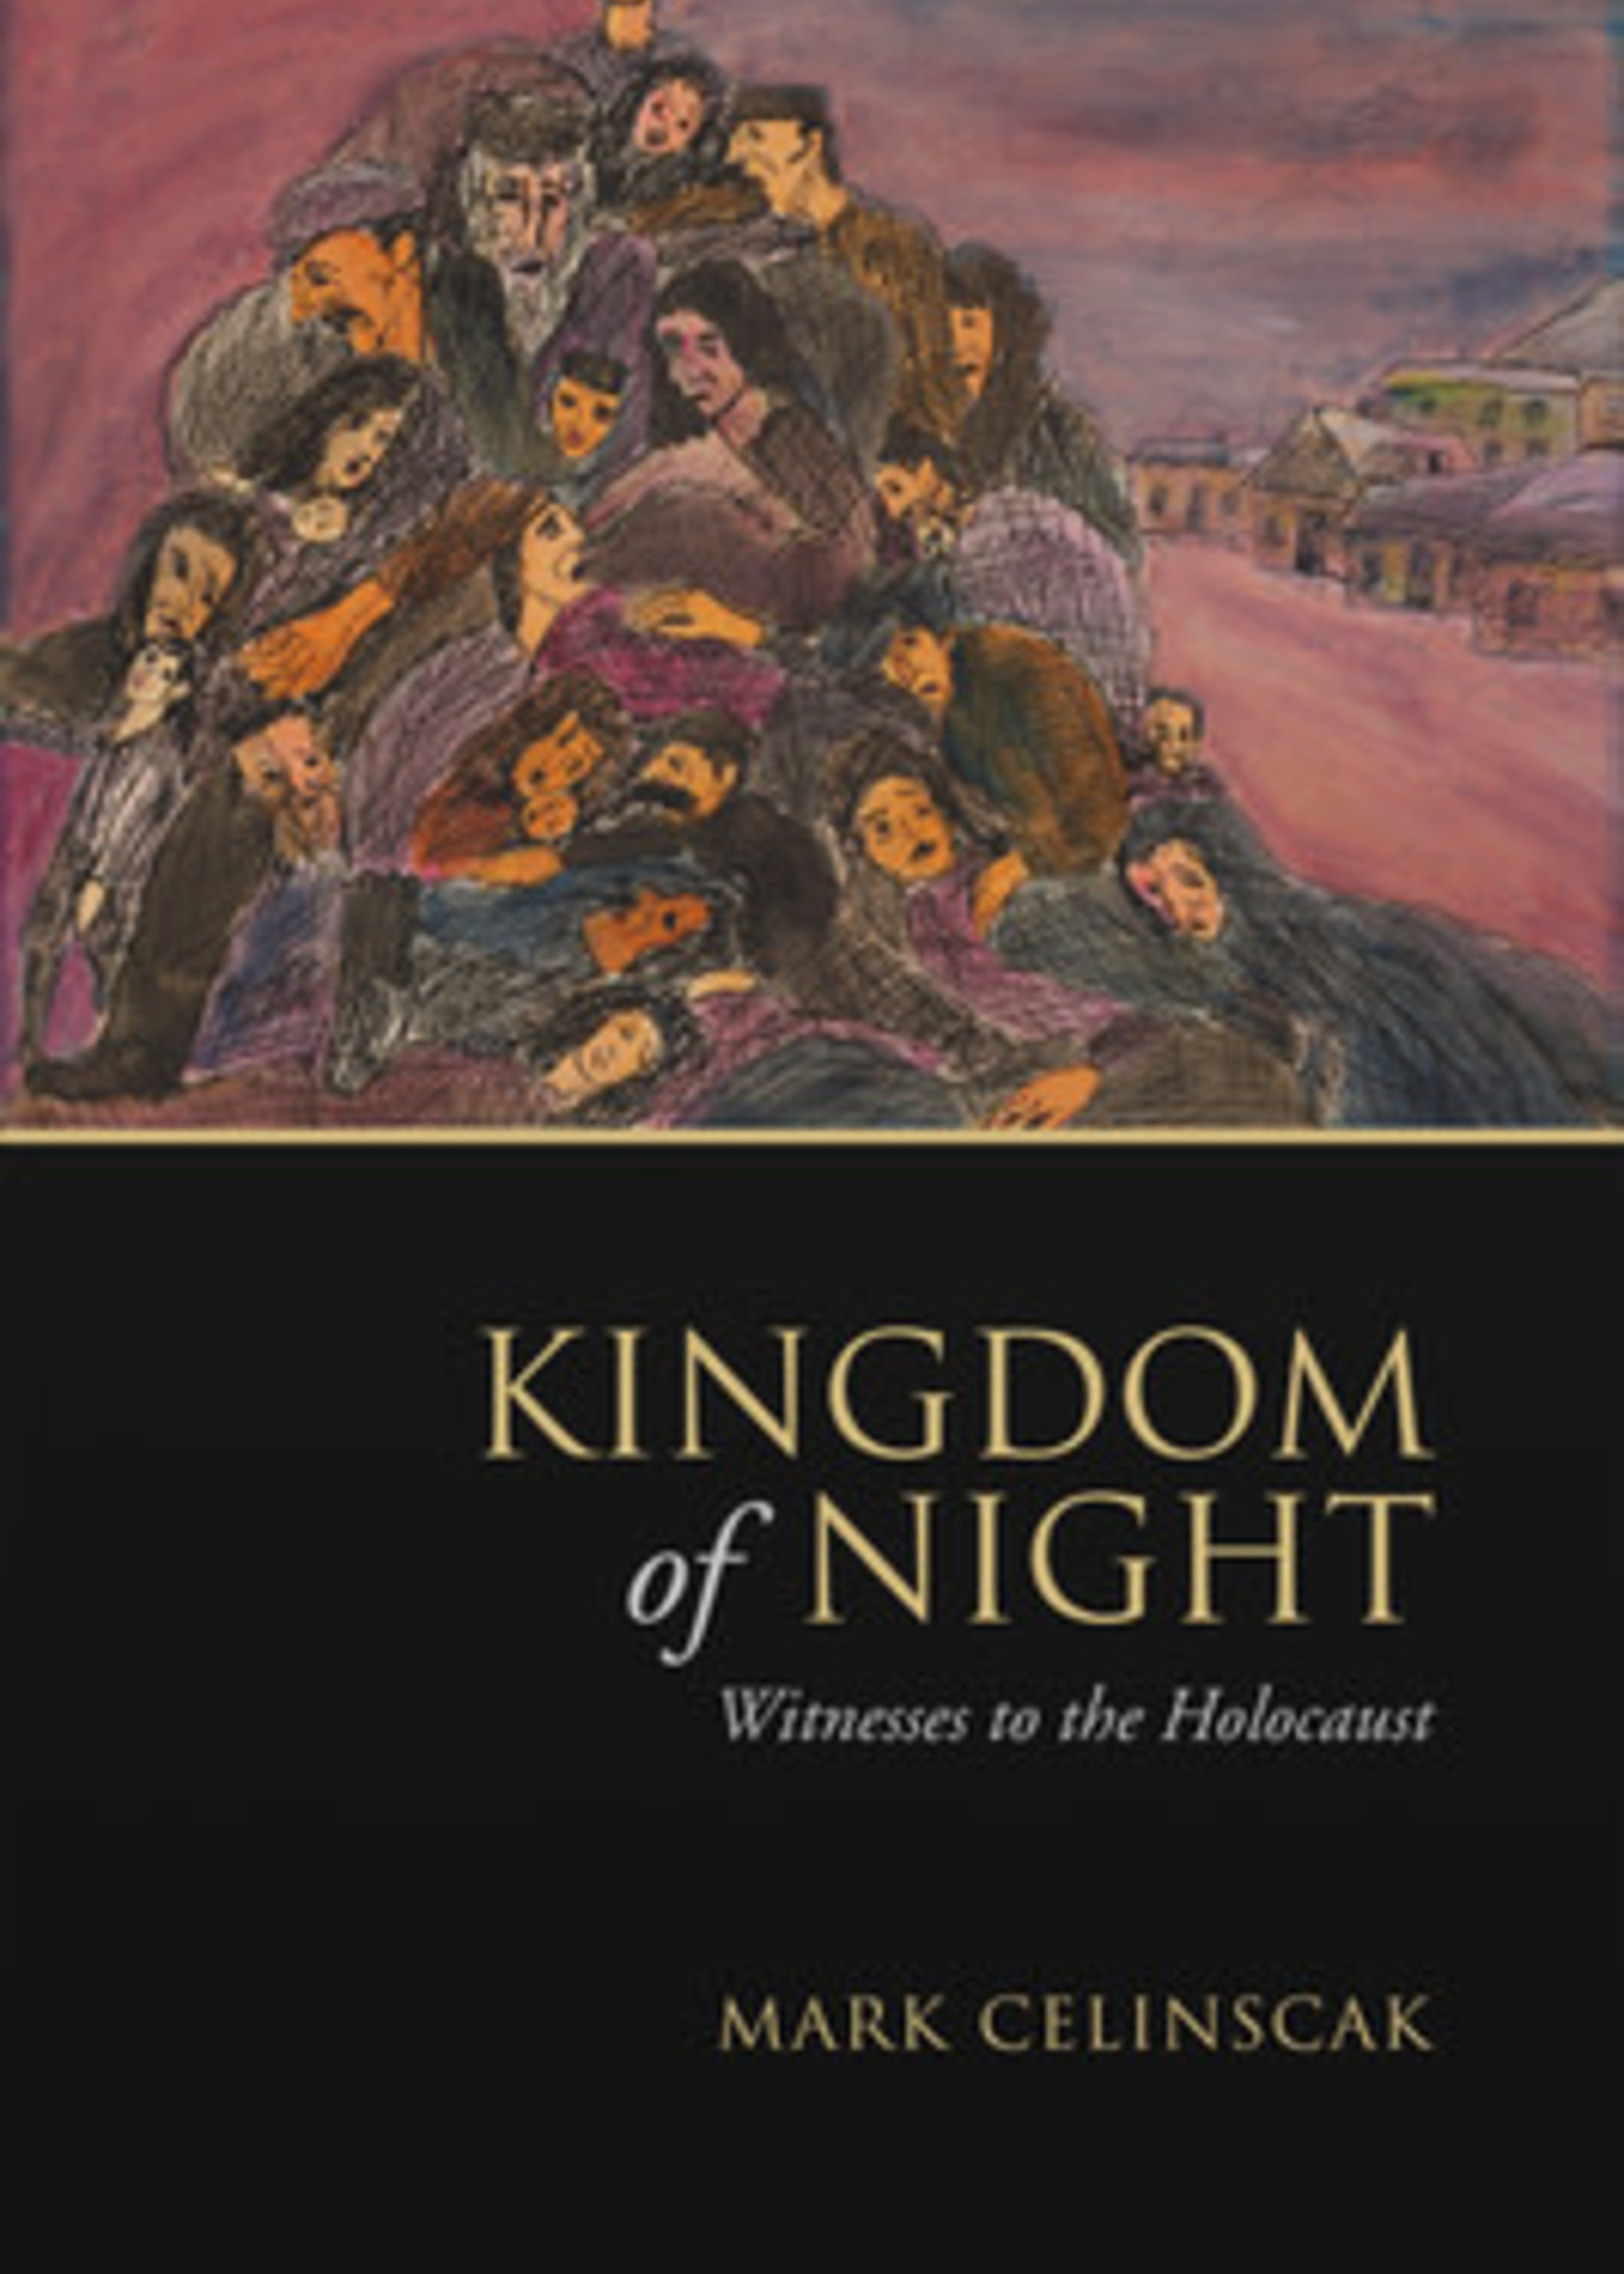 Kingdom of Night: Witnesses to the Holocaust by Mark Celinscak